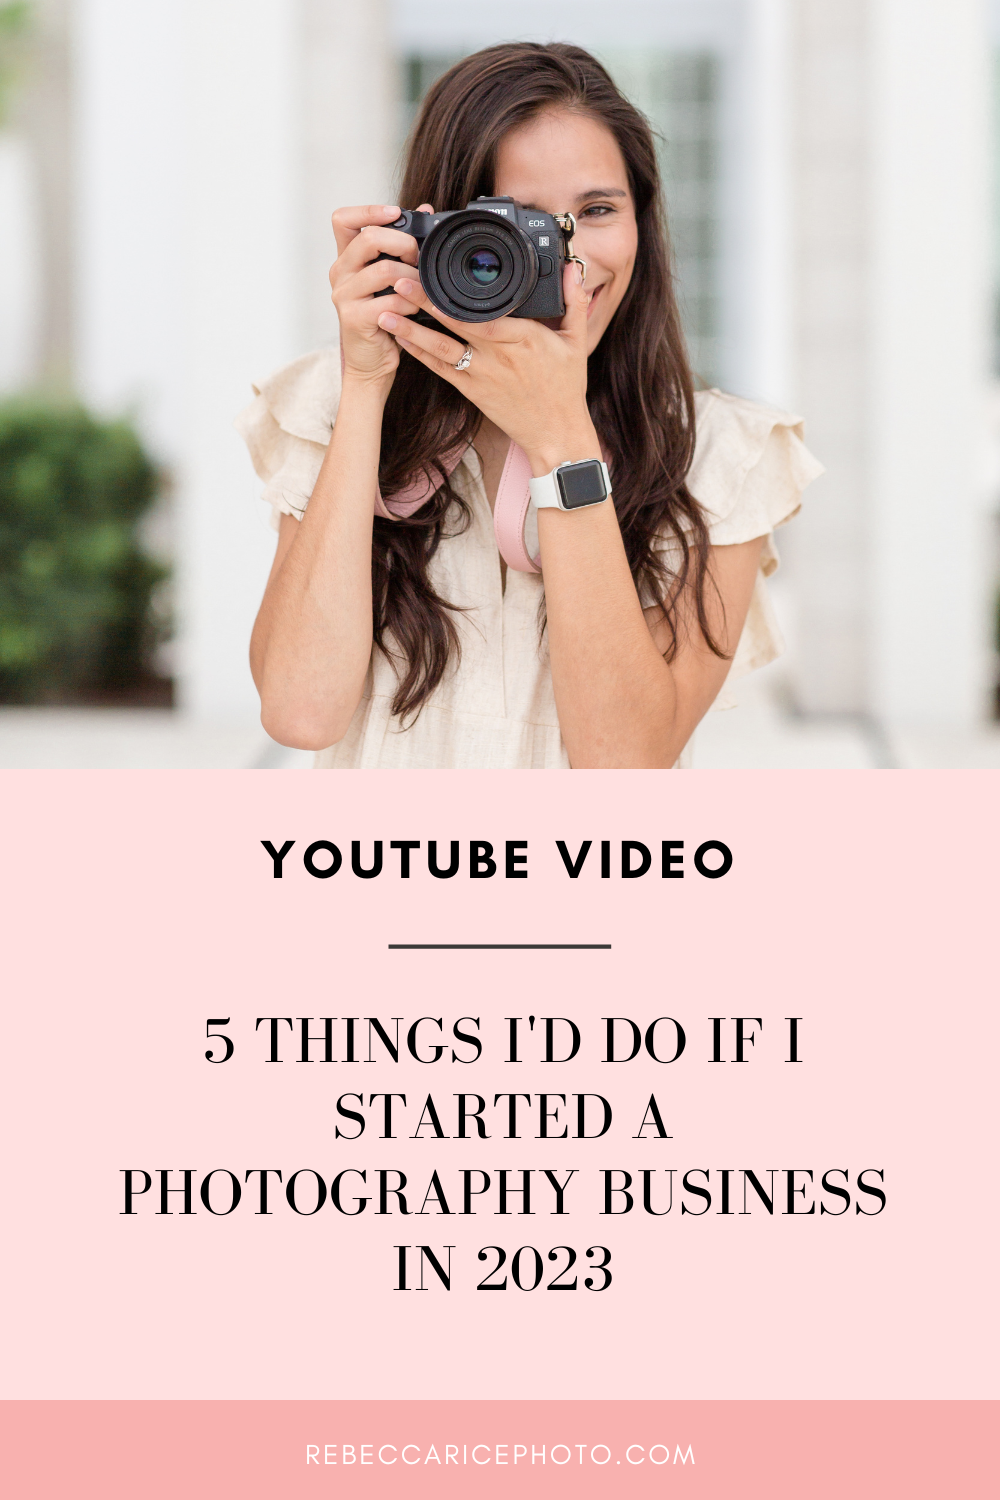 5 Things I'd do if I started a Photography Business in 2023